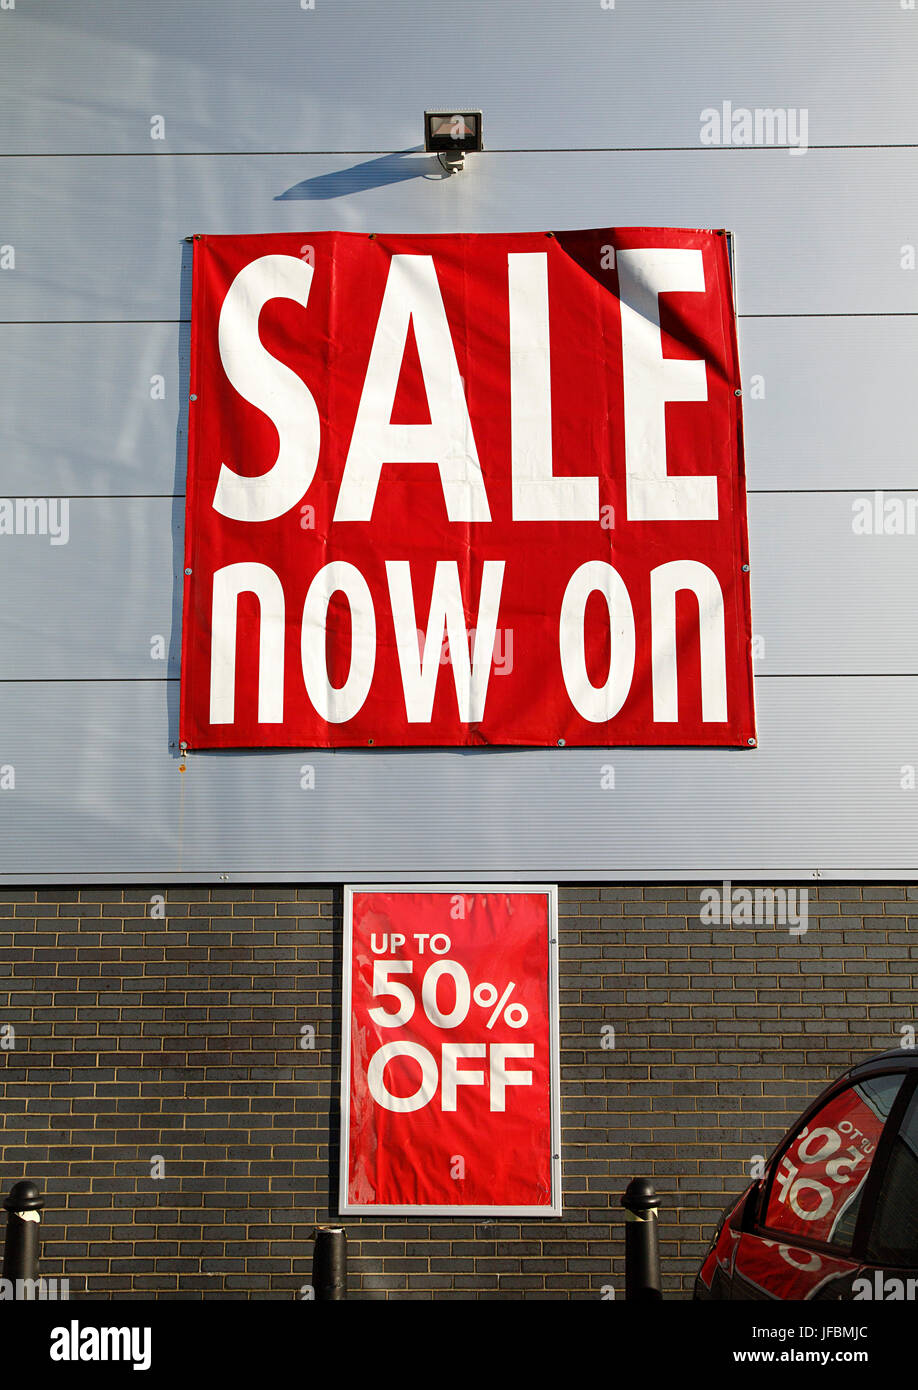 Sale Now On - Poster Stock Photo